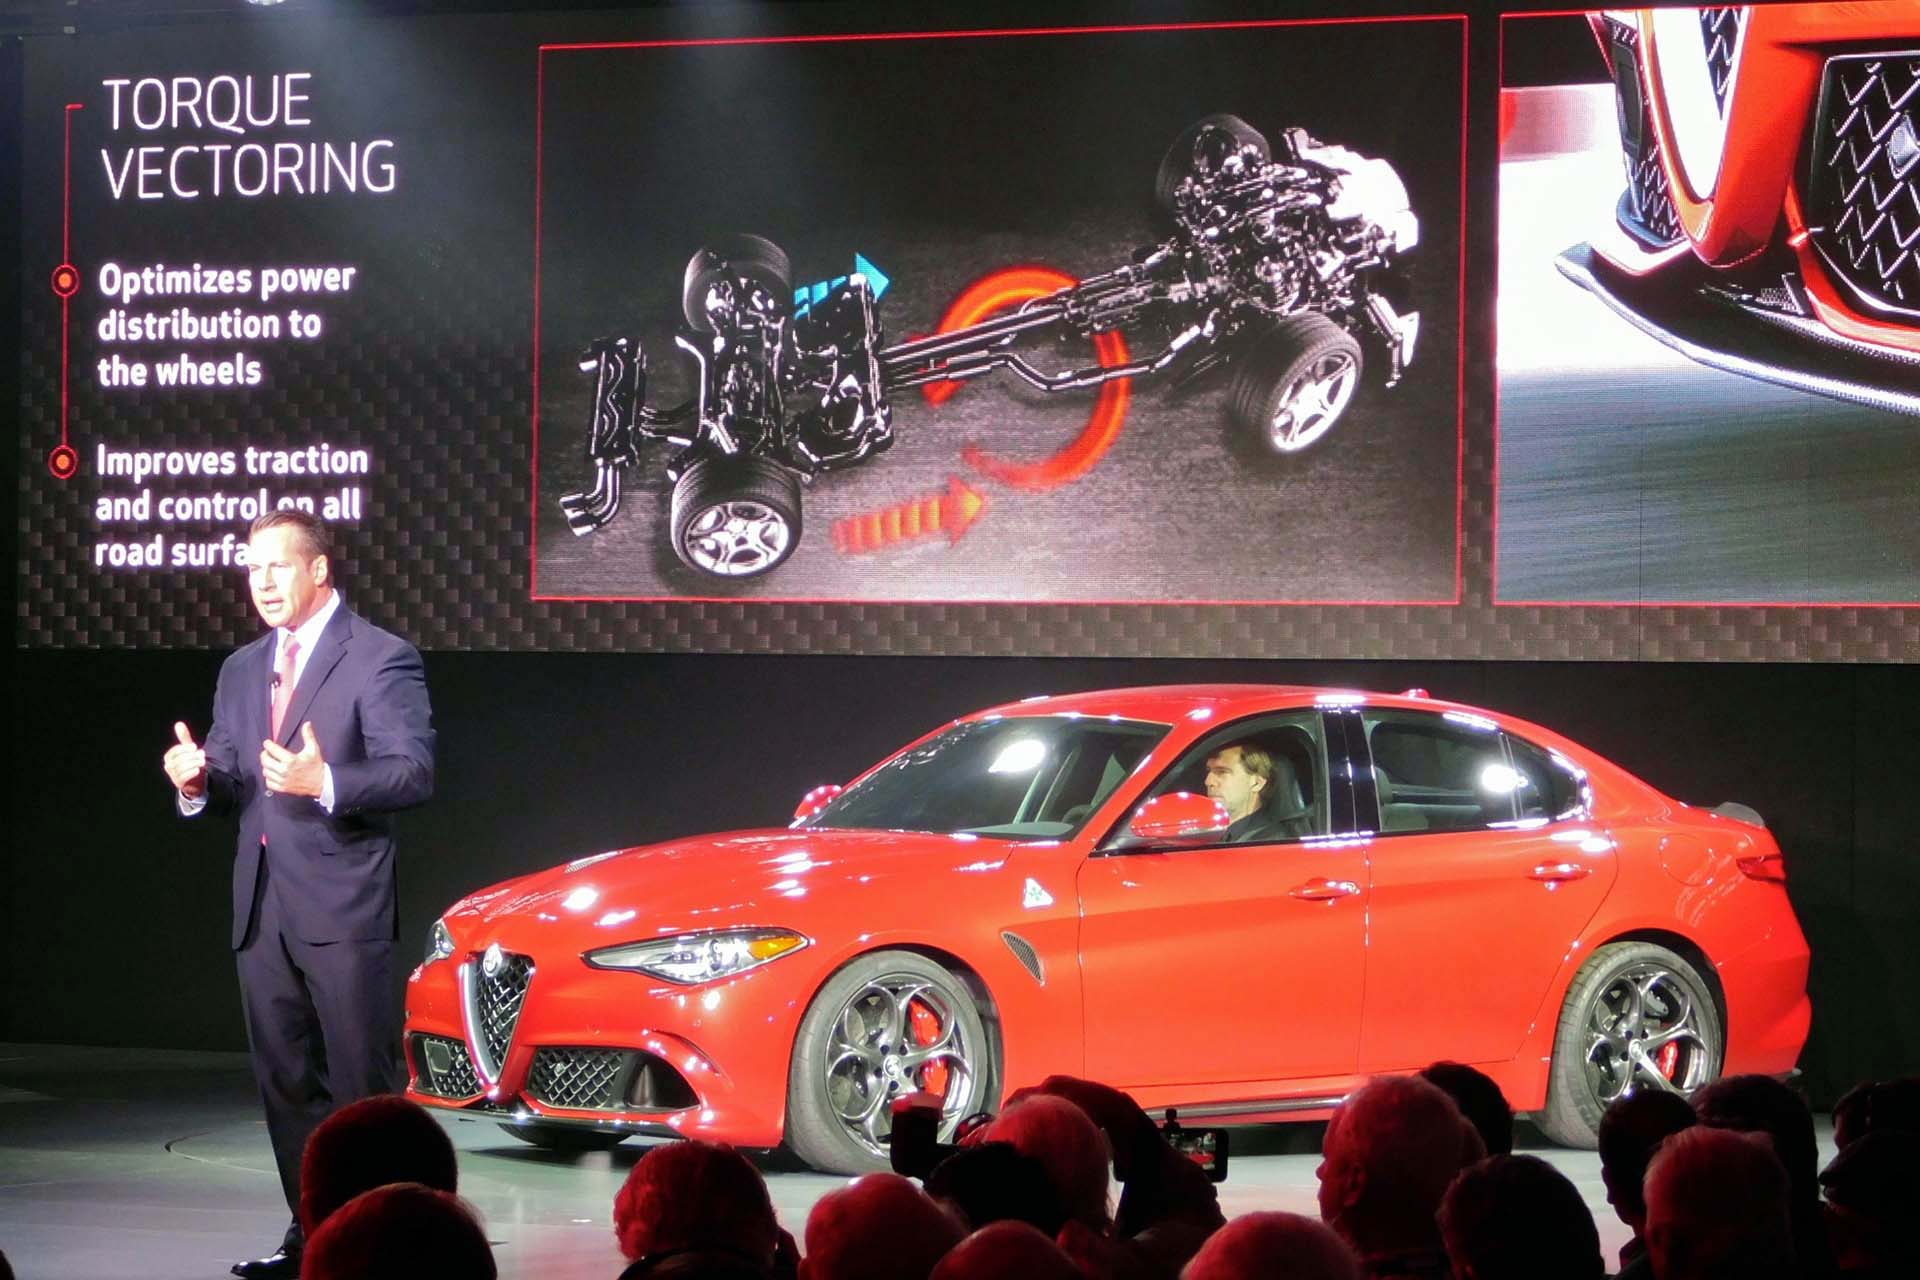 With a pair Ferrari engineers leading the Giulia’s development, the Quadrifoglio edition produces 505 hp from a 2.9L biturbo V6, delivered to the rear wheels via a six-speed Getrag manual gearbox, although Bigland hinted that an automatic with paddle shifters would also be made available.